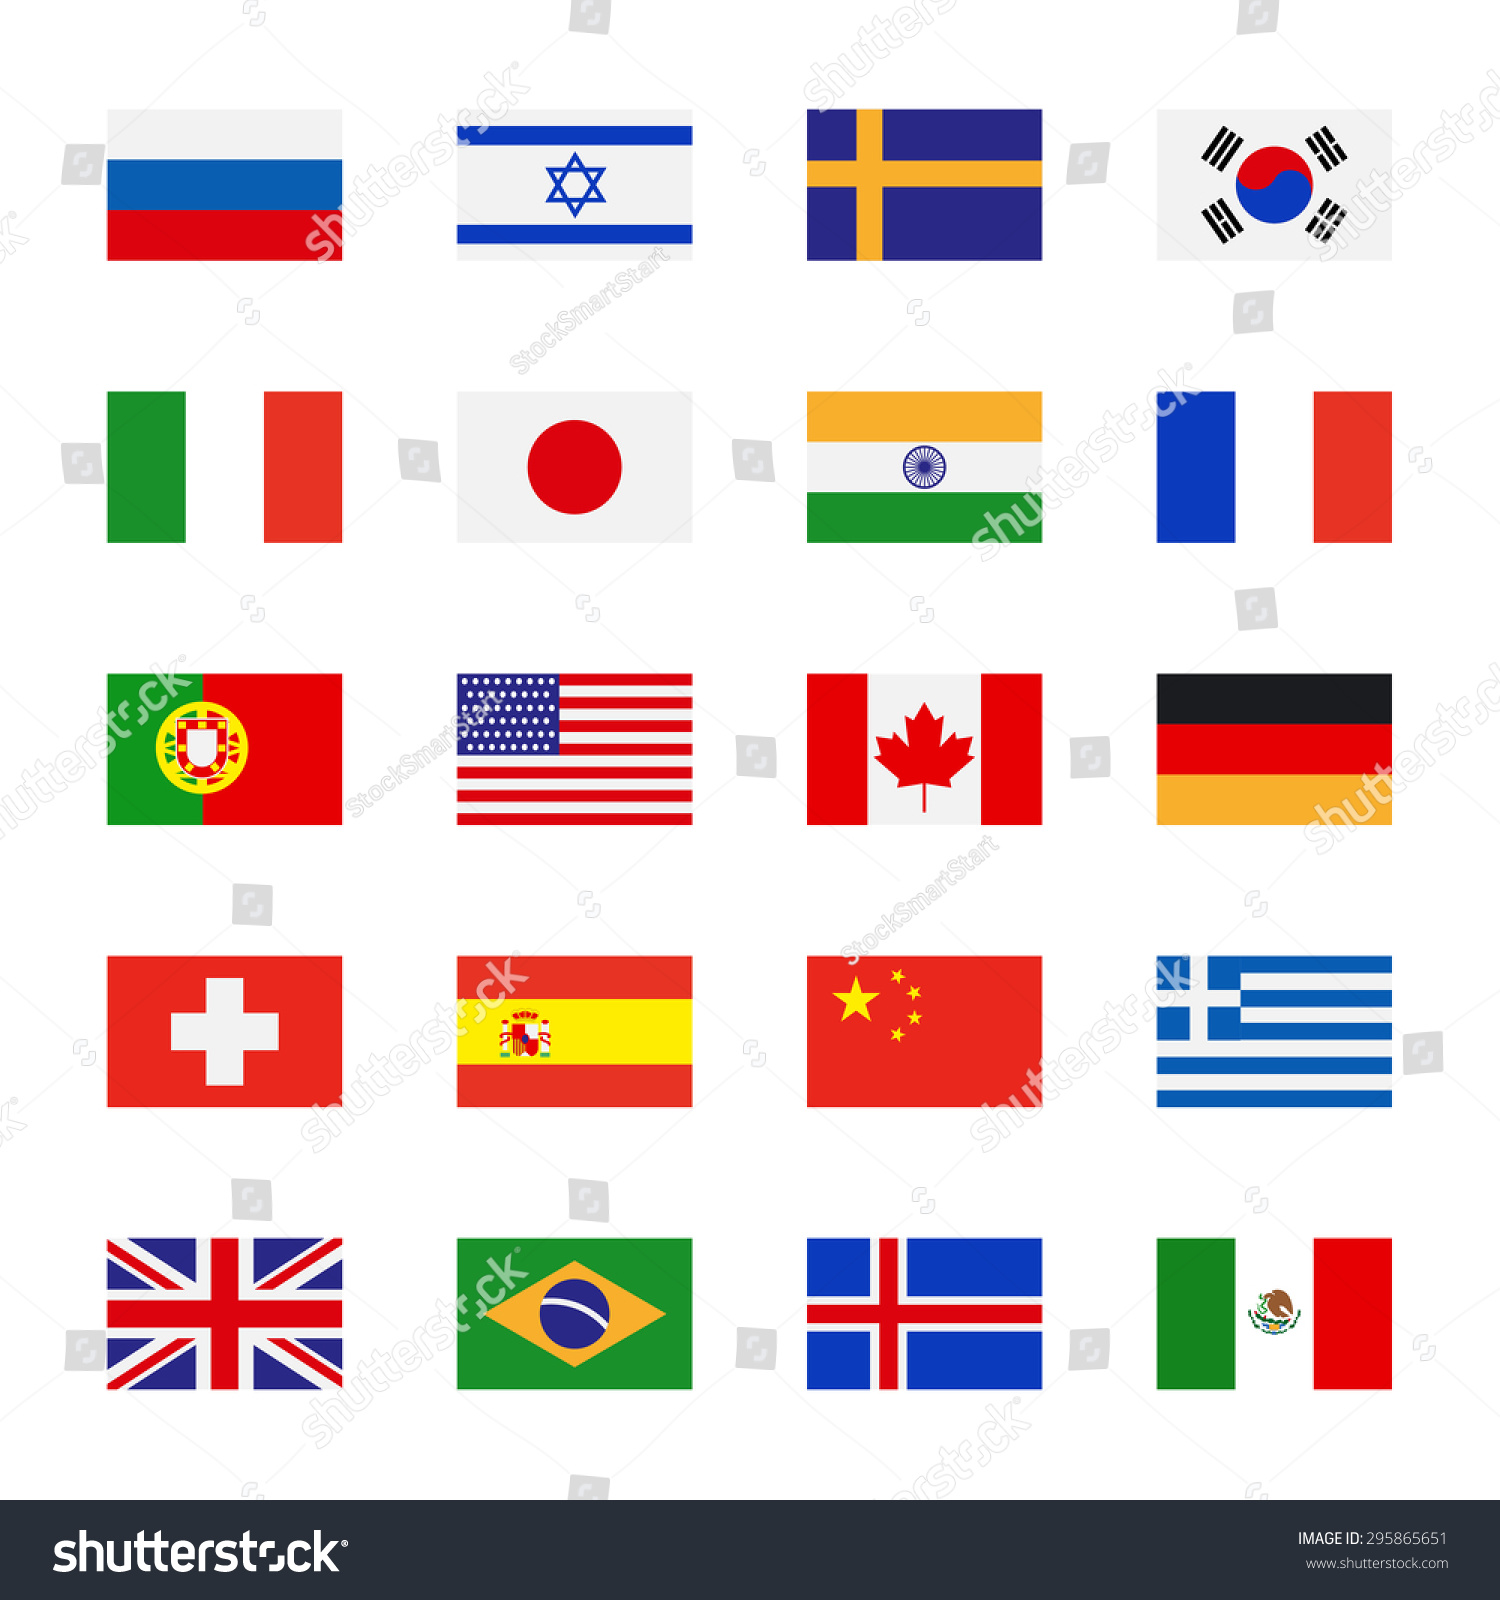 Flags Icons Flat Style Simple Flags Stock Illustration 295865651